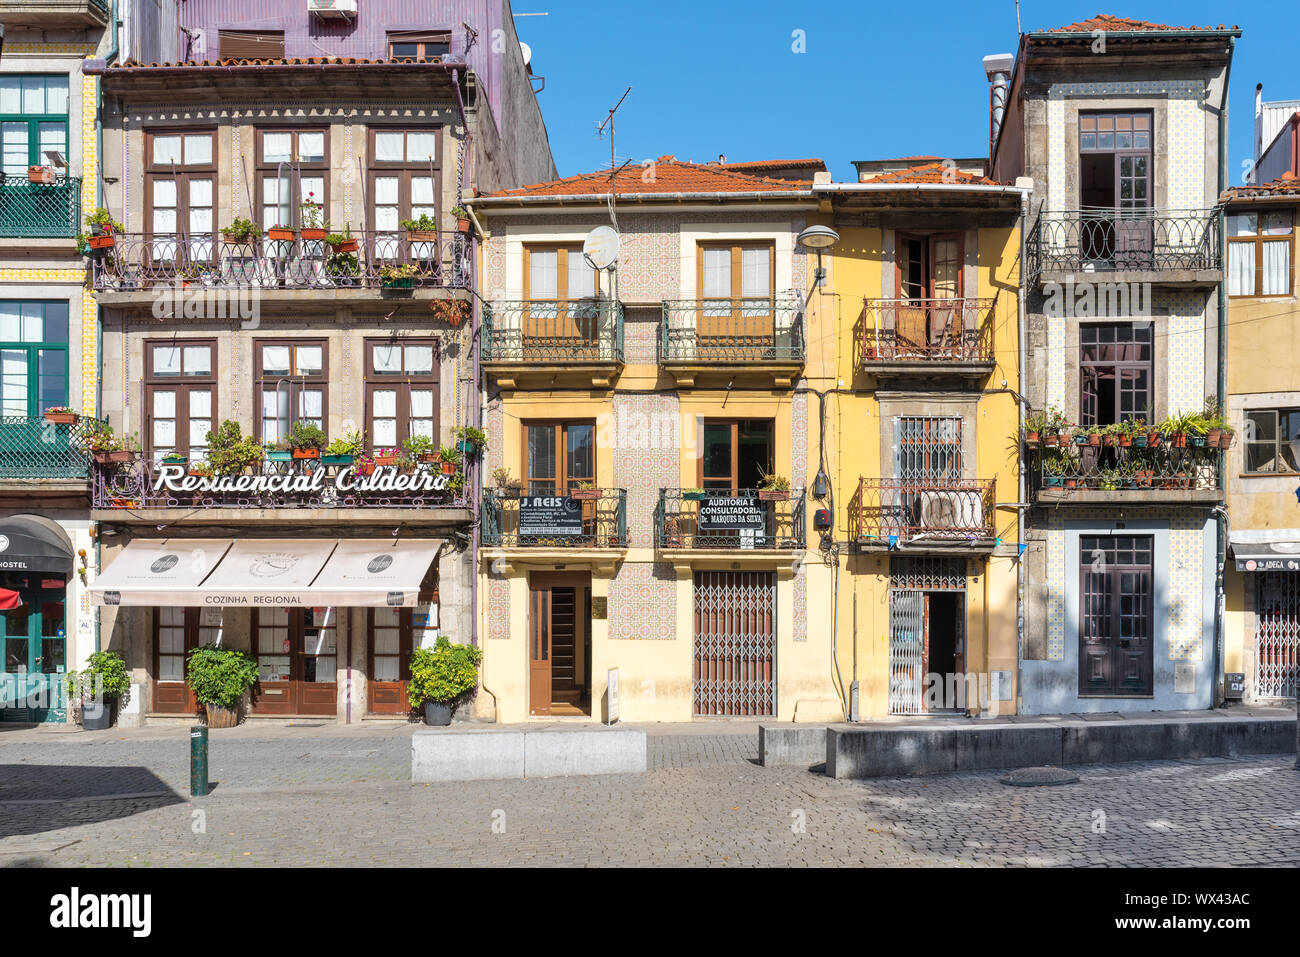 Typical old townhouse of Portuguese architectural style in Porto Stock Photo